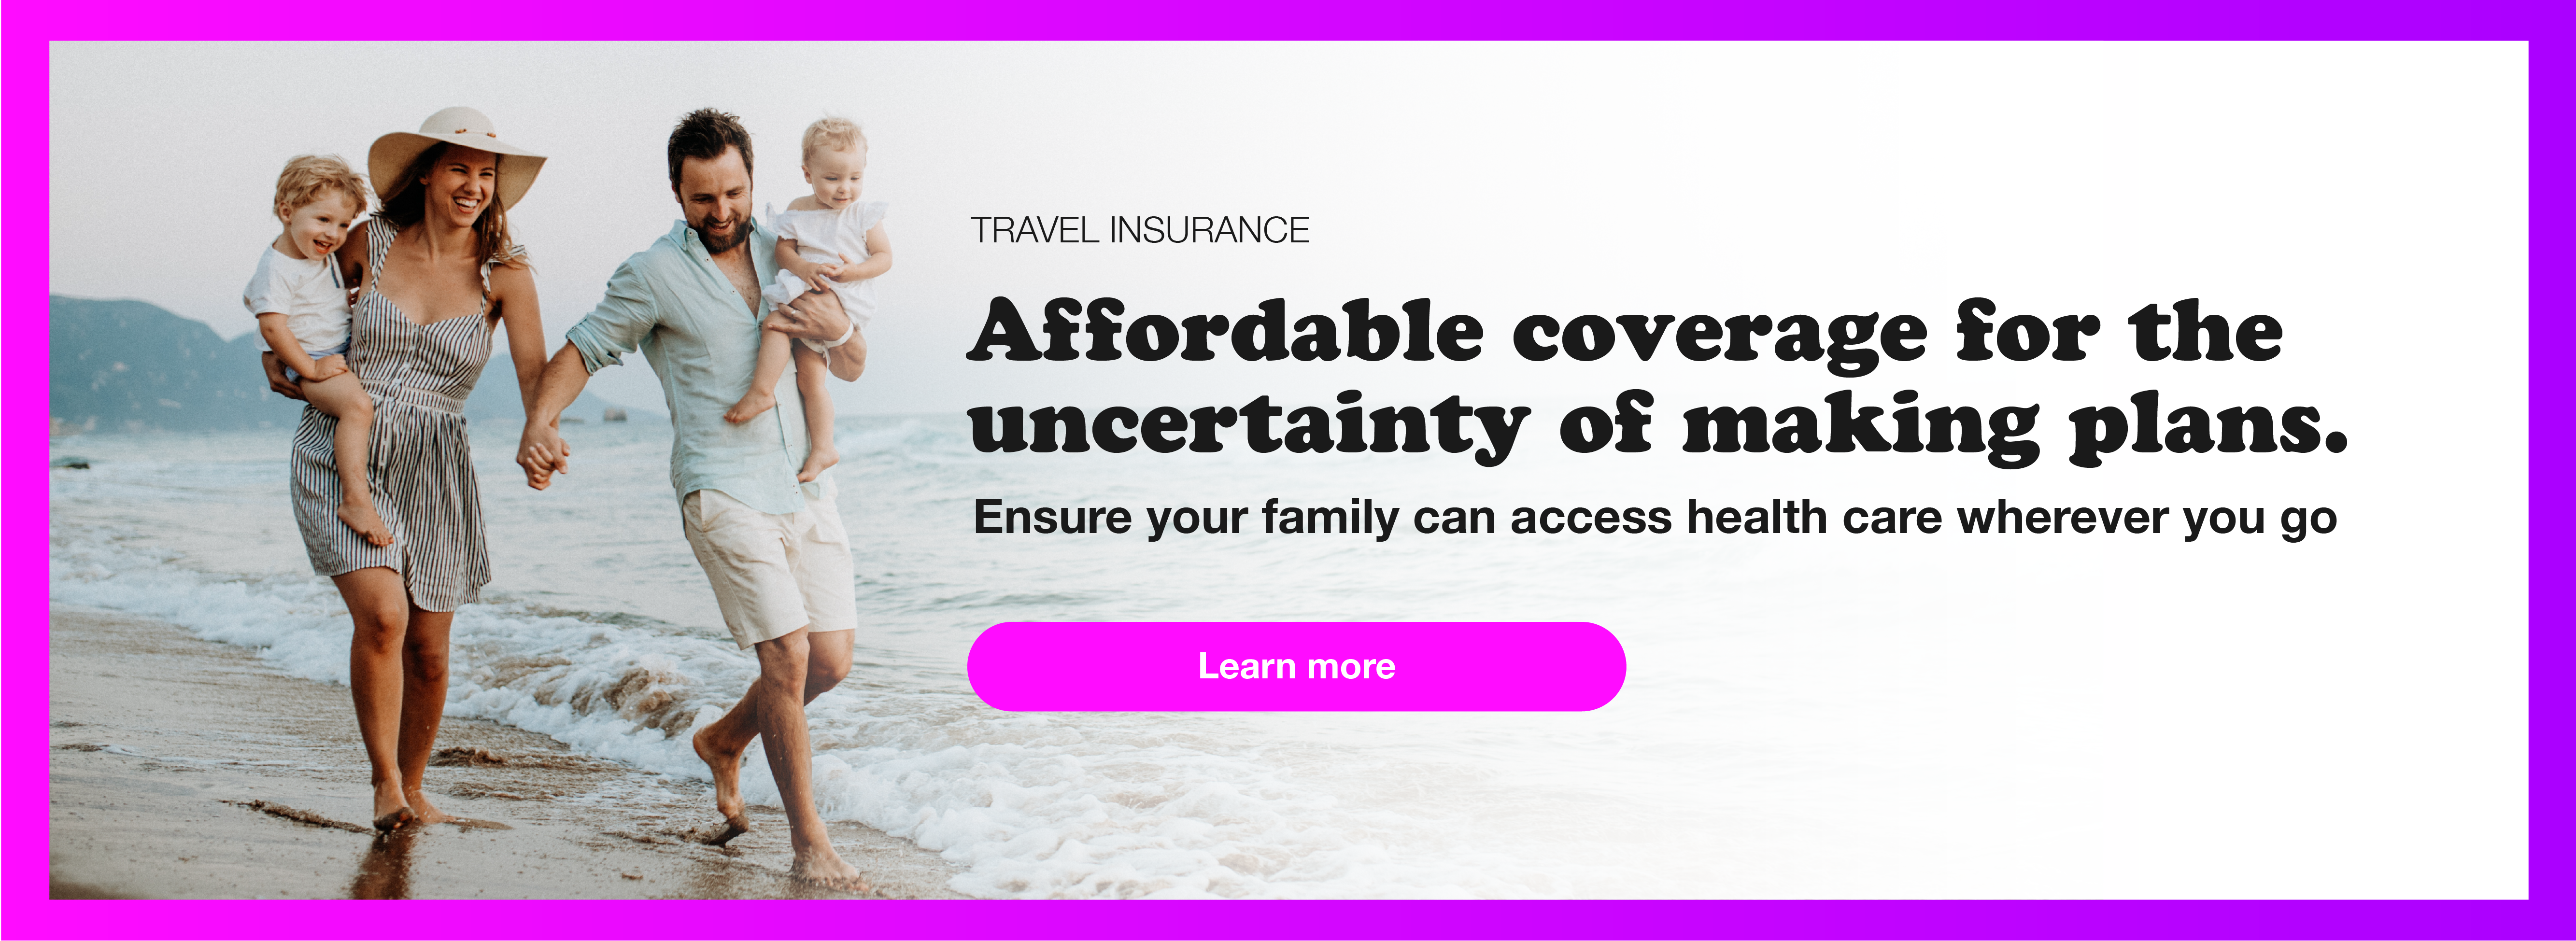 Travel Insurance: Affordable coverage for the uncertainty of making plans. Ensure your family can access health care wherever you go. Learn more